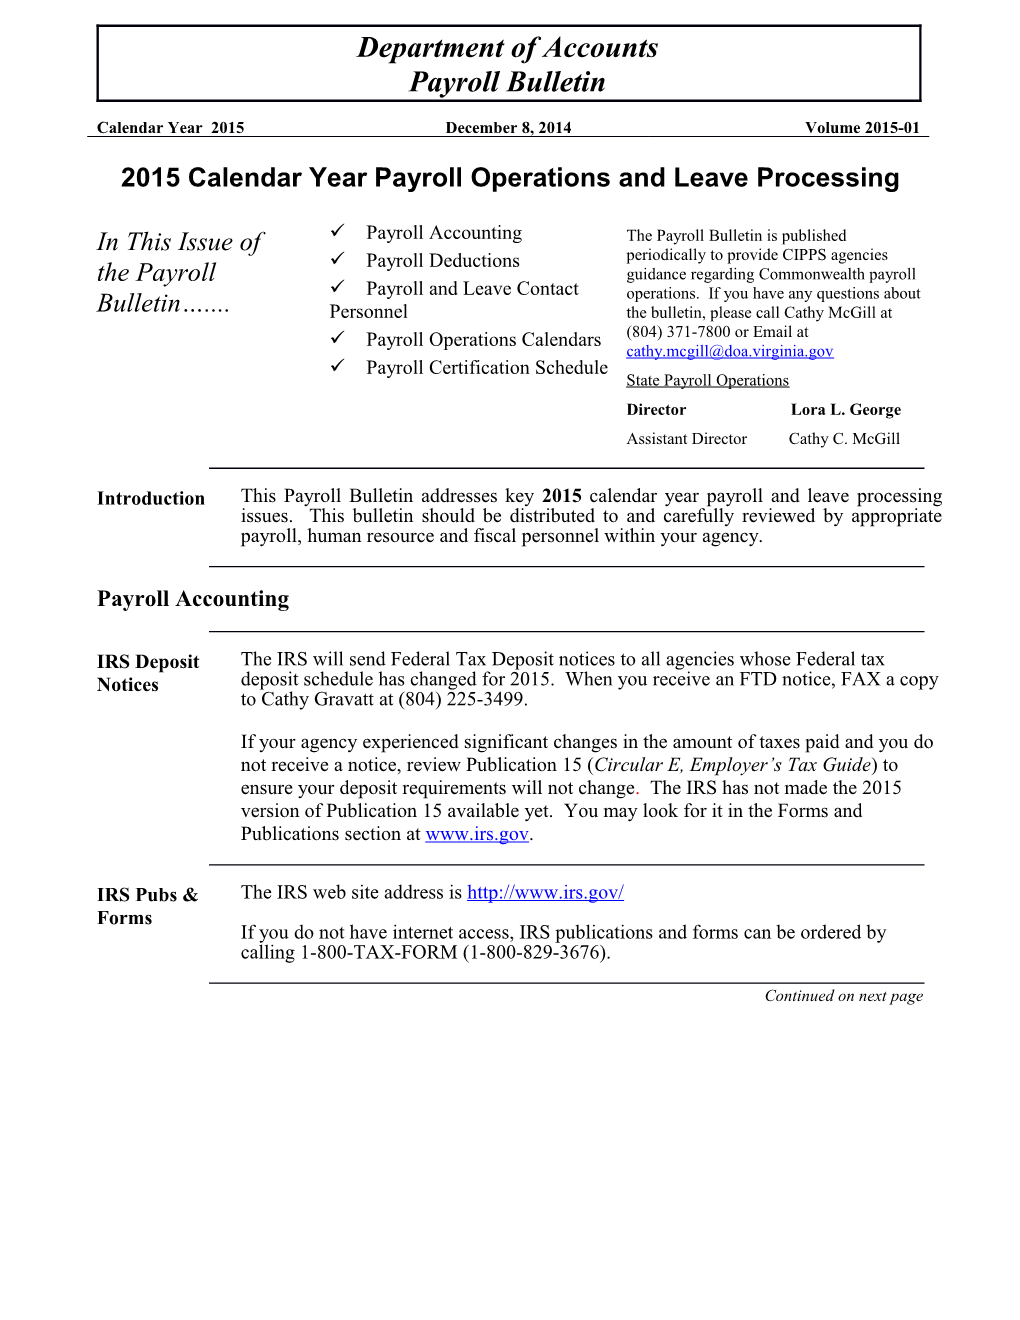 2015 Calendar Year Payroll Operations and Leave Processing